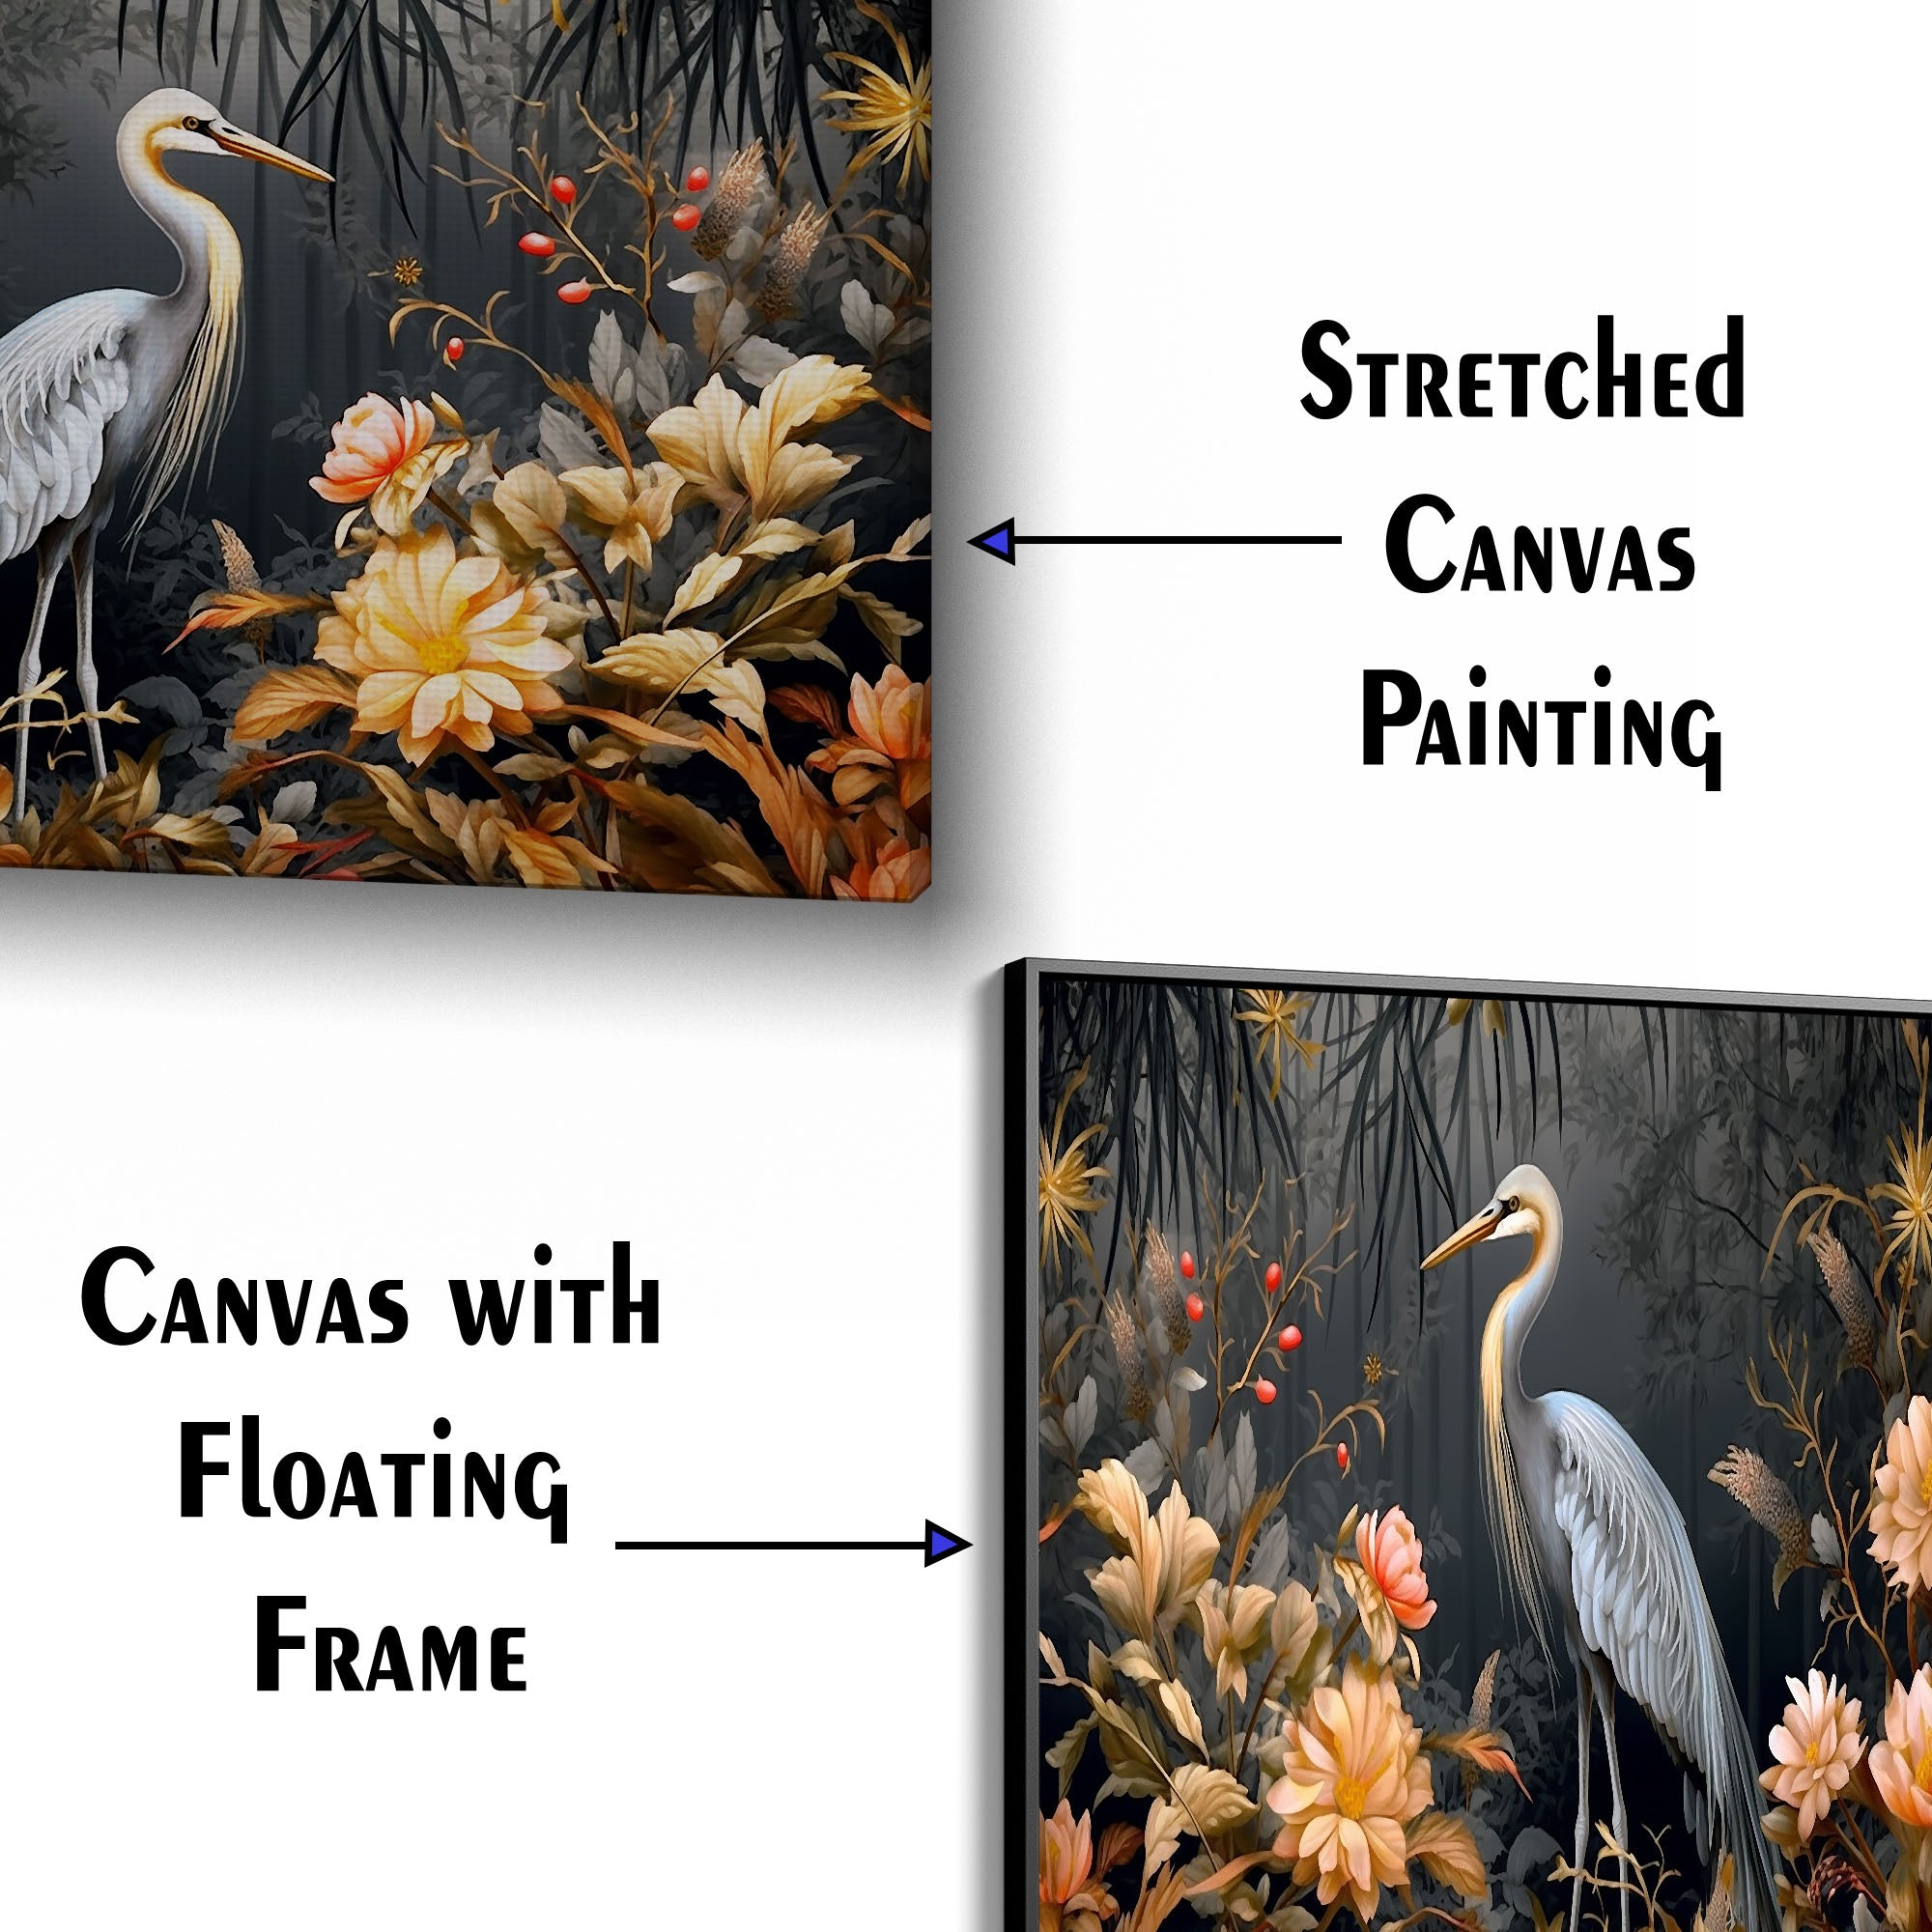 Flowers And Flamingo Canvas Wall Painting